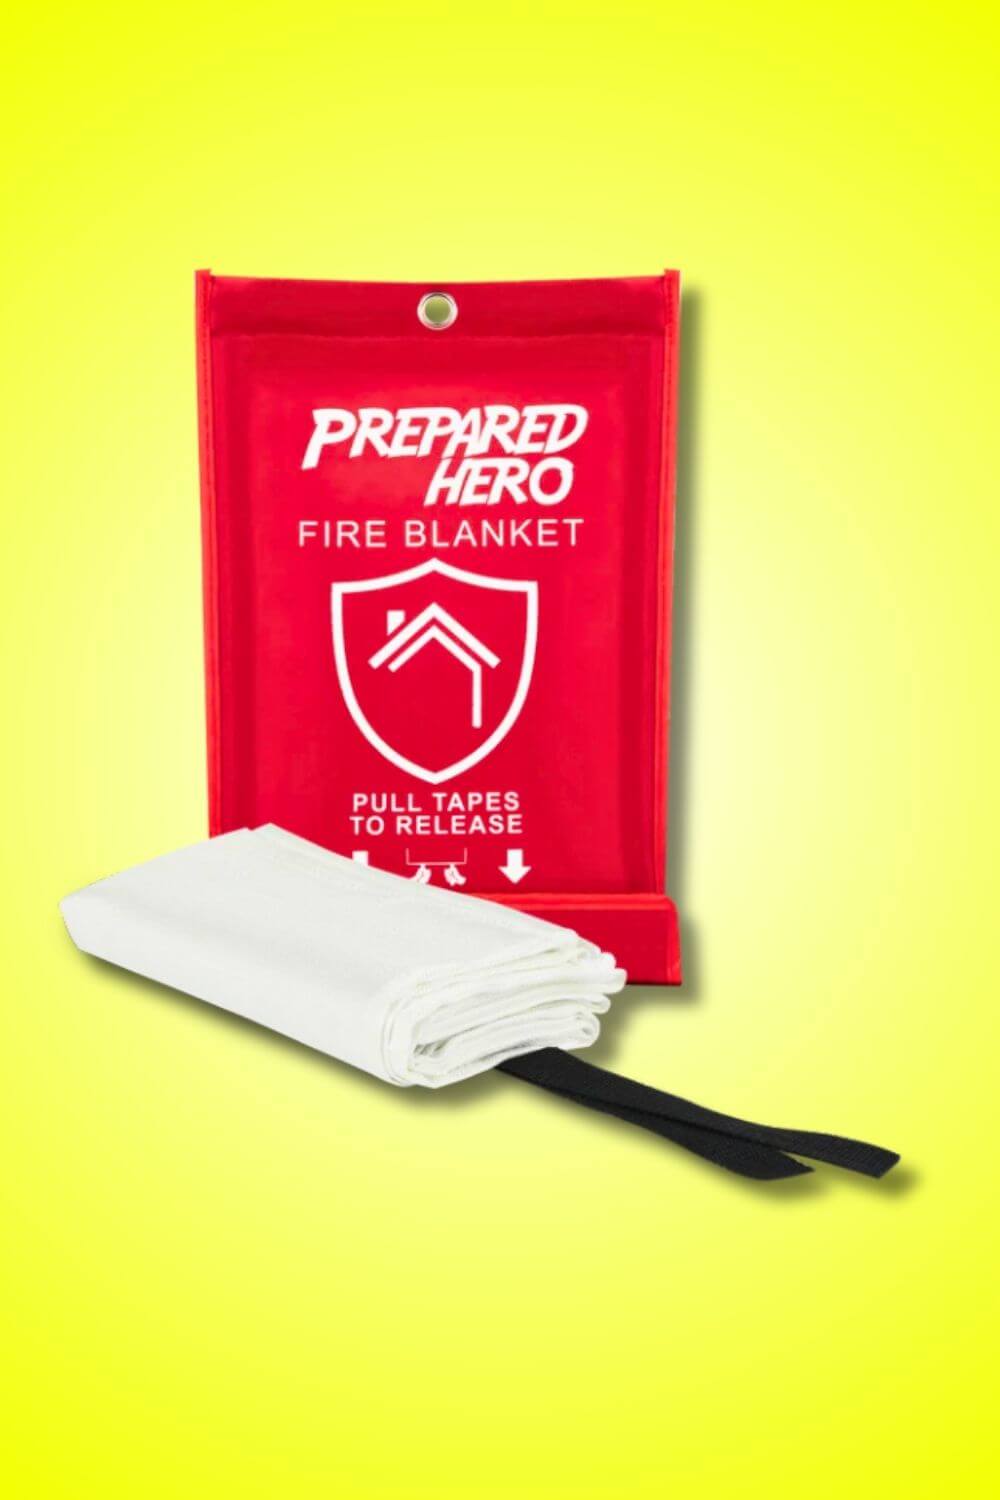 Prepared Hero Emergency Fire Blanket Extinguishes Small Fires Quickly